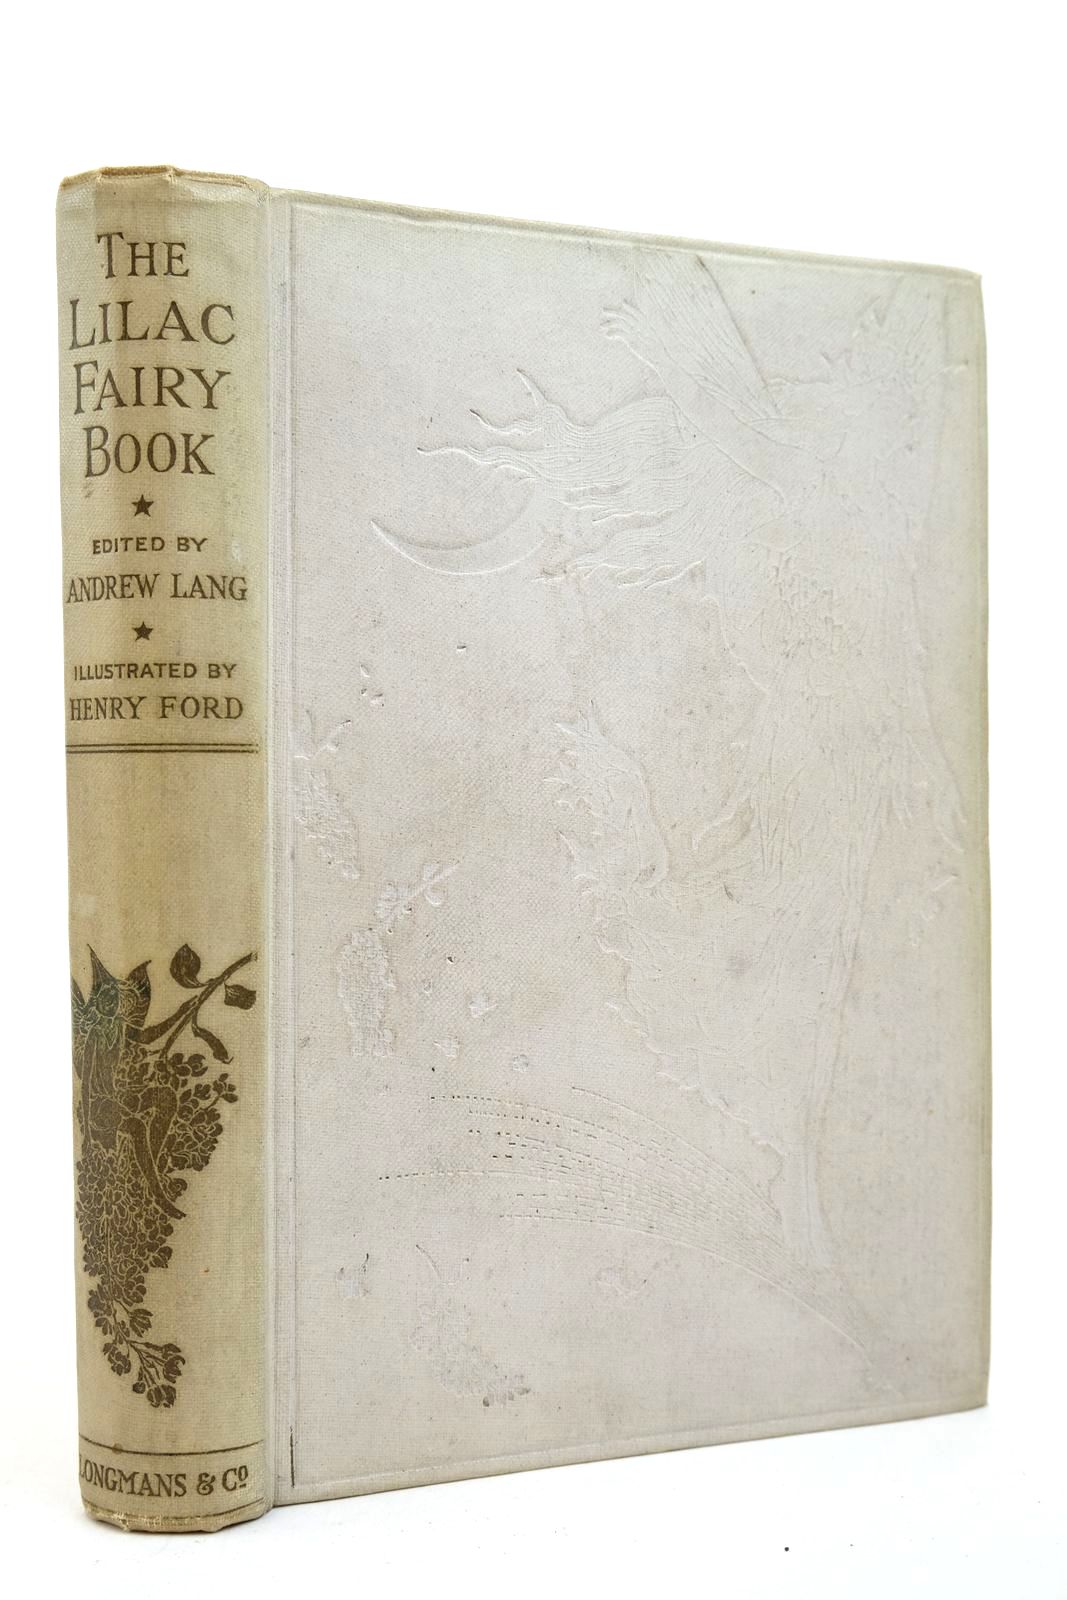 Photo of THE LILAC FAIRY BOOK written by Lang, Andrew illustrated by Ford, H.J. published by Longmans, Green and Co. Ltd. (STOCK CODE: 2139771)  for sale by Stella & Rose's Books